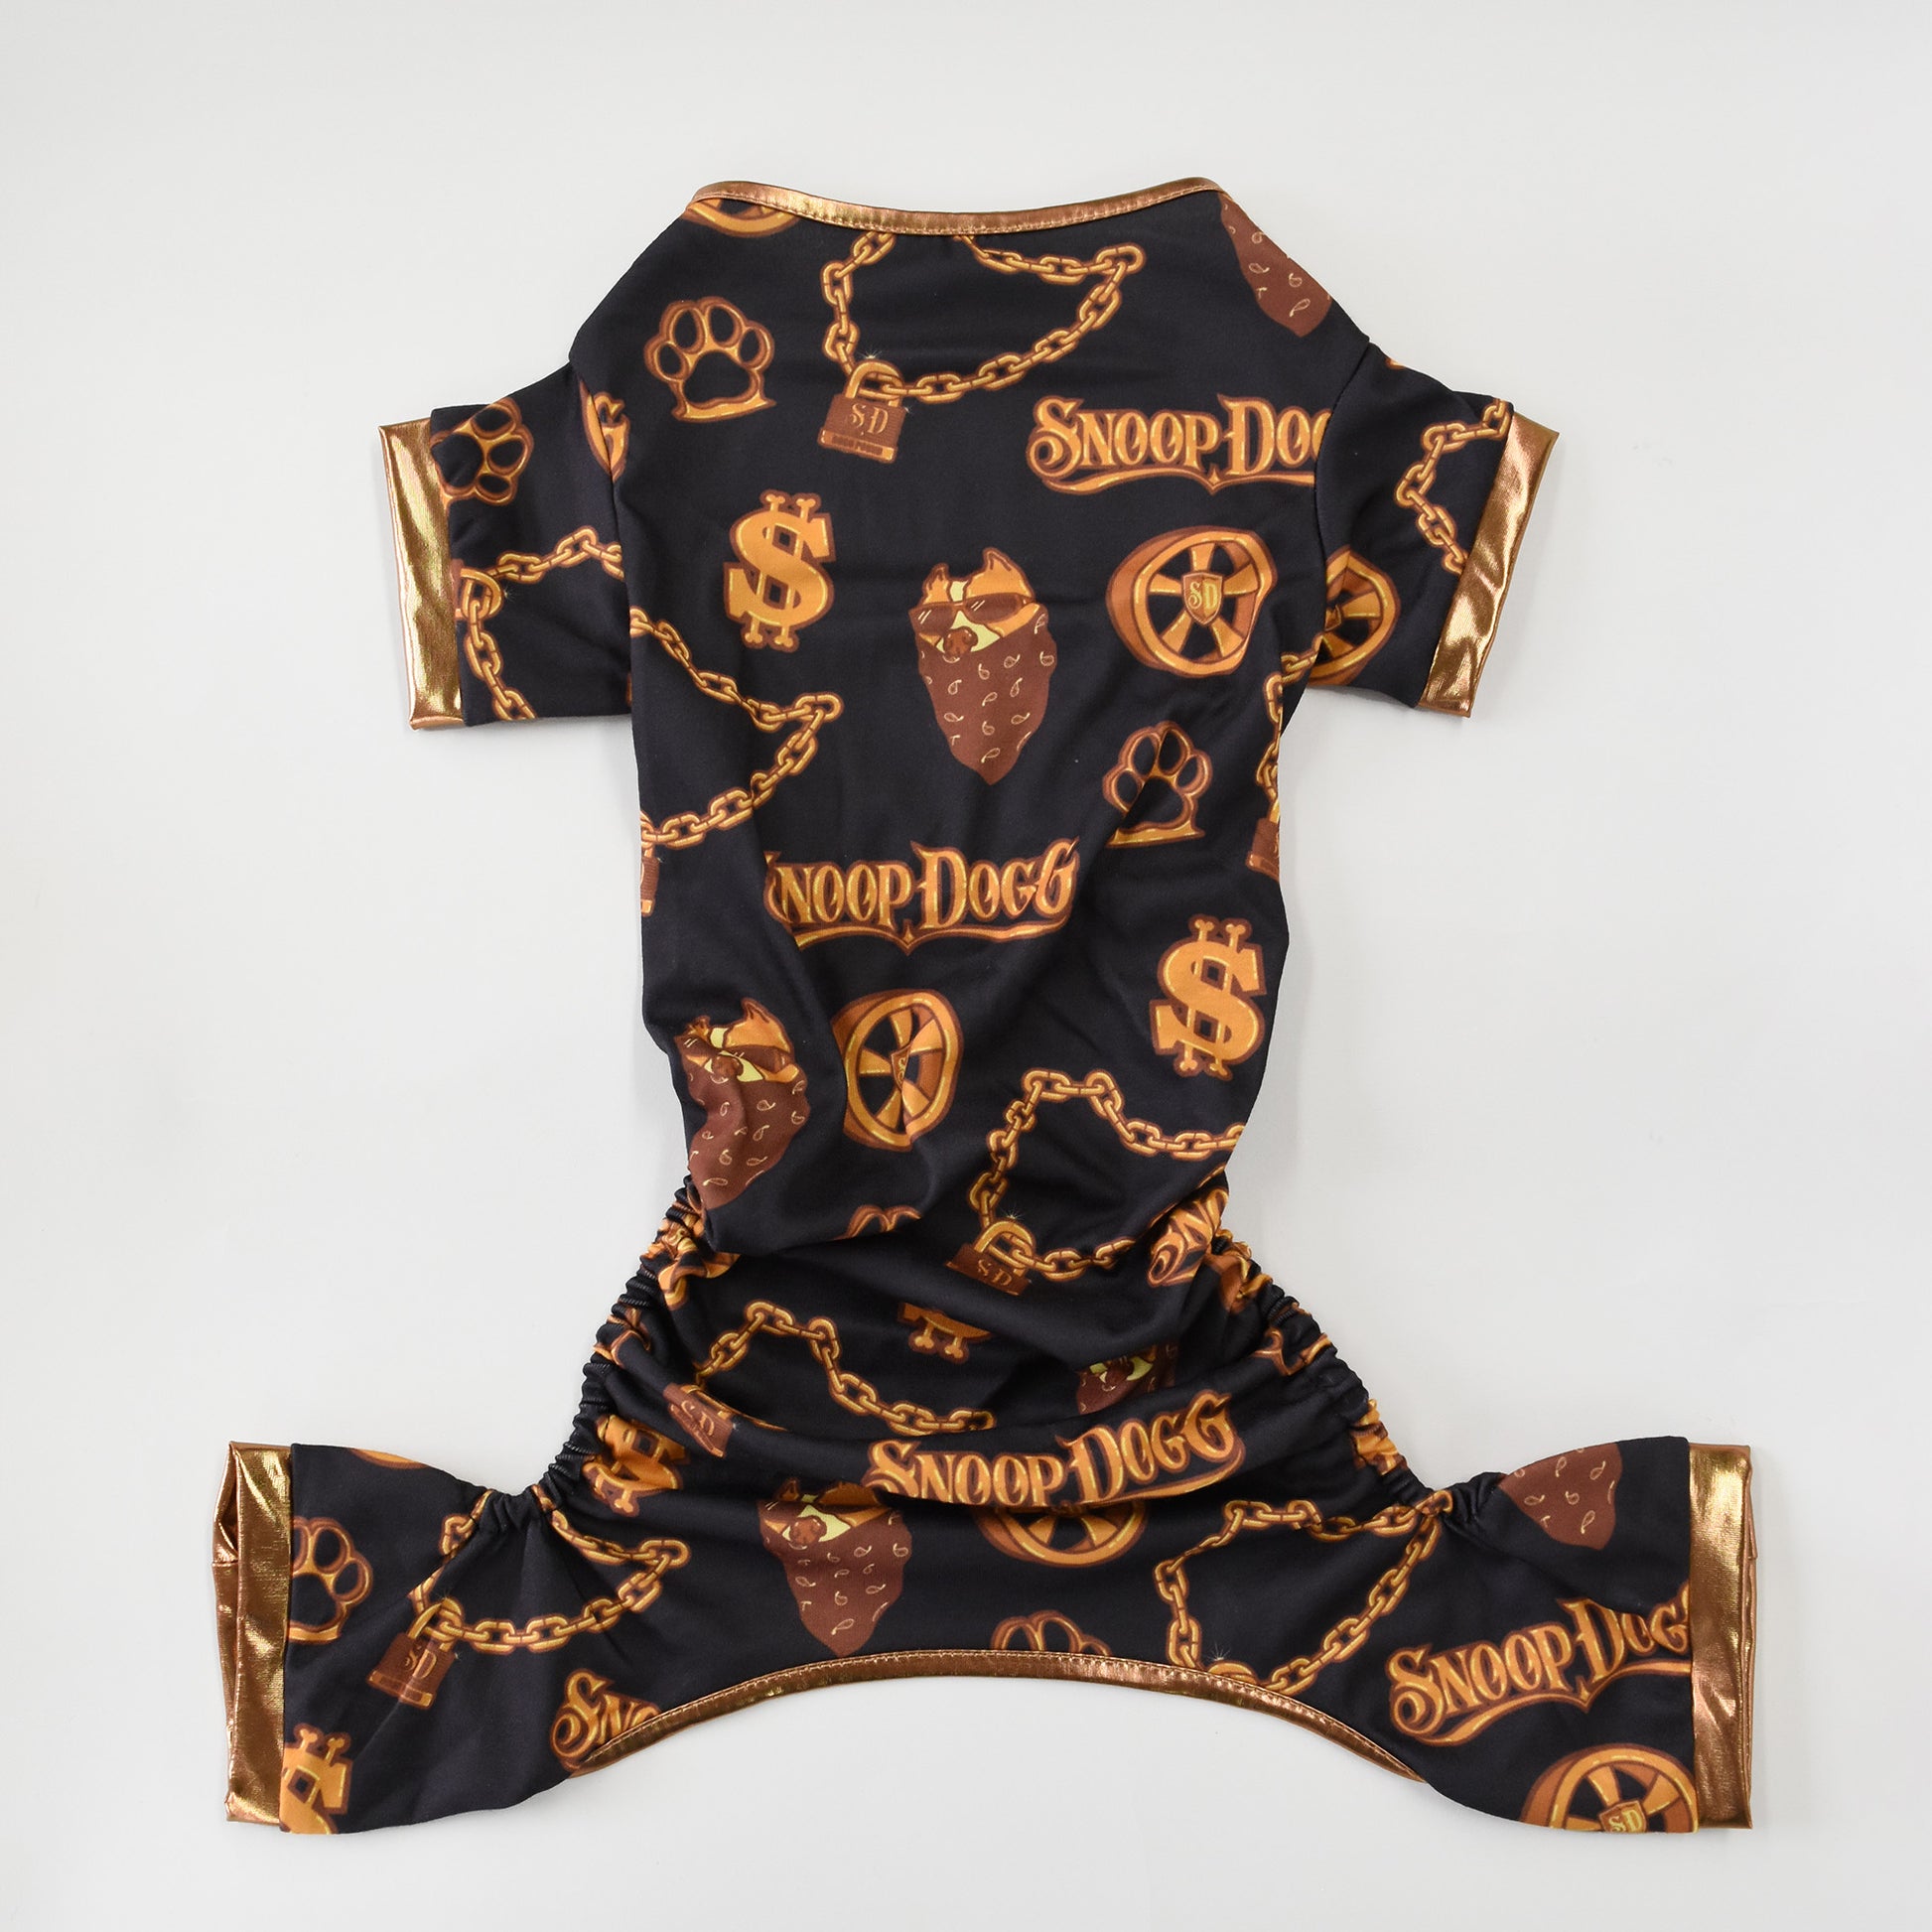 Product flat lay of the Off The Chain Deluxe Pet PJs.